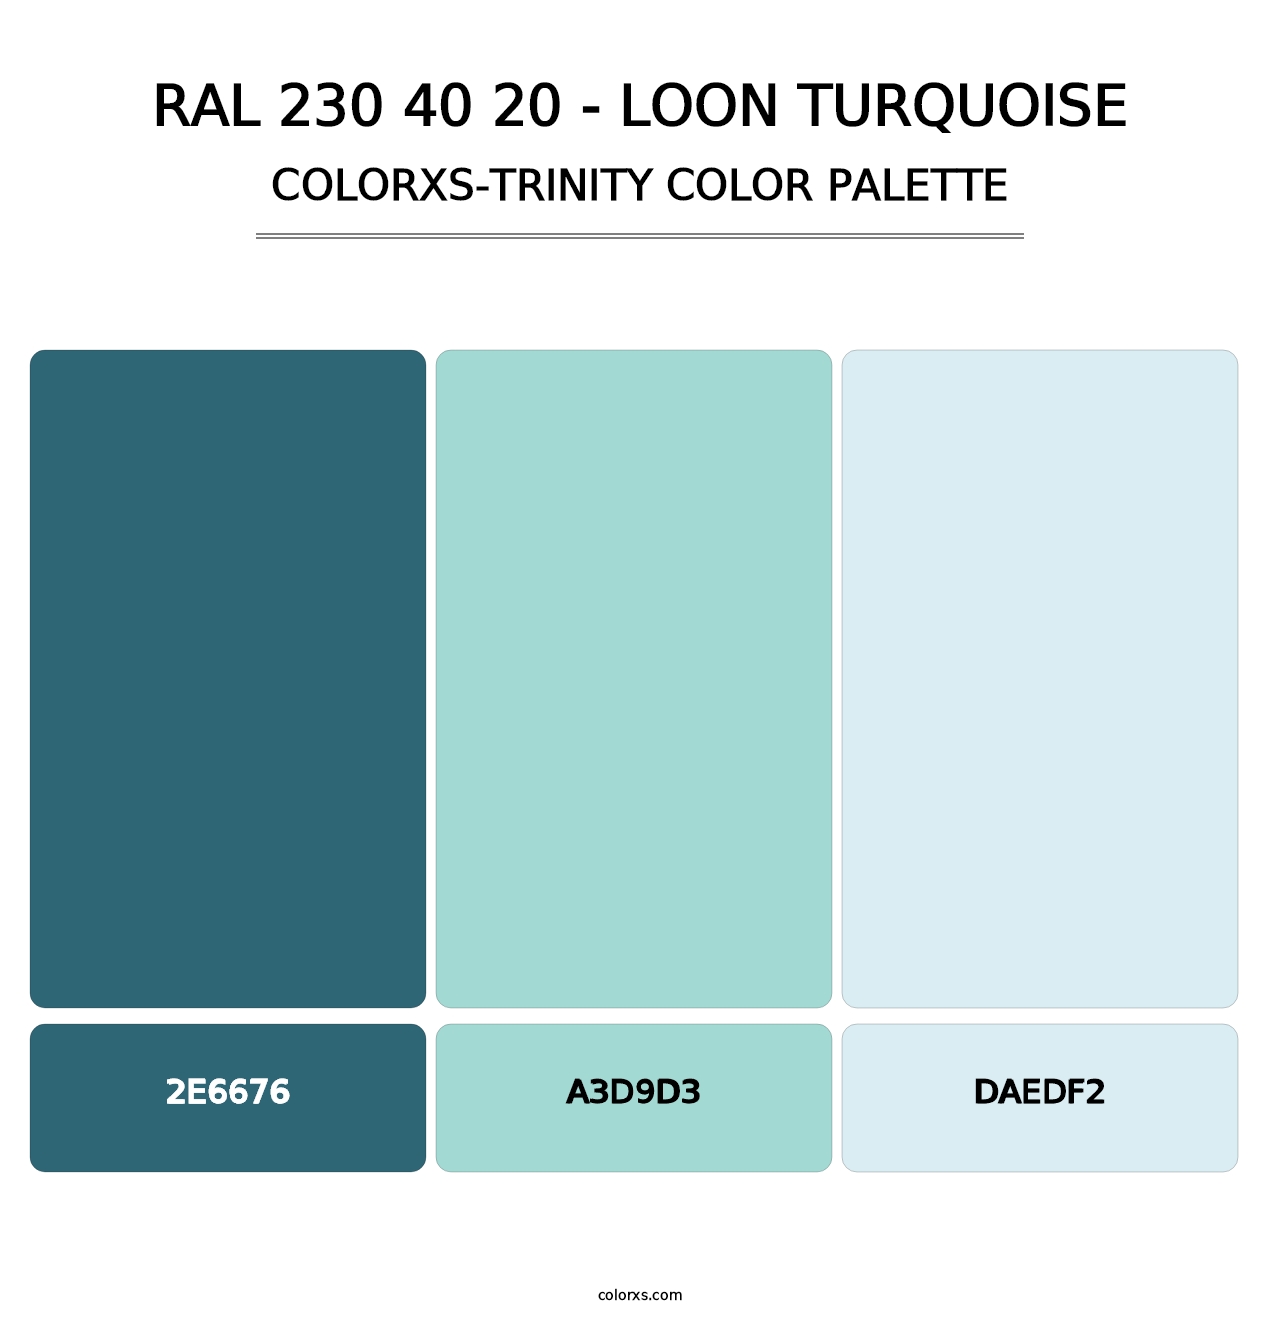 RAL 230 40 20 - Loon Turquoise - Colorxs Trinity Palette